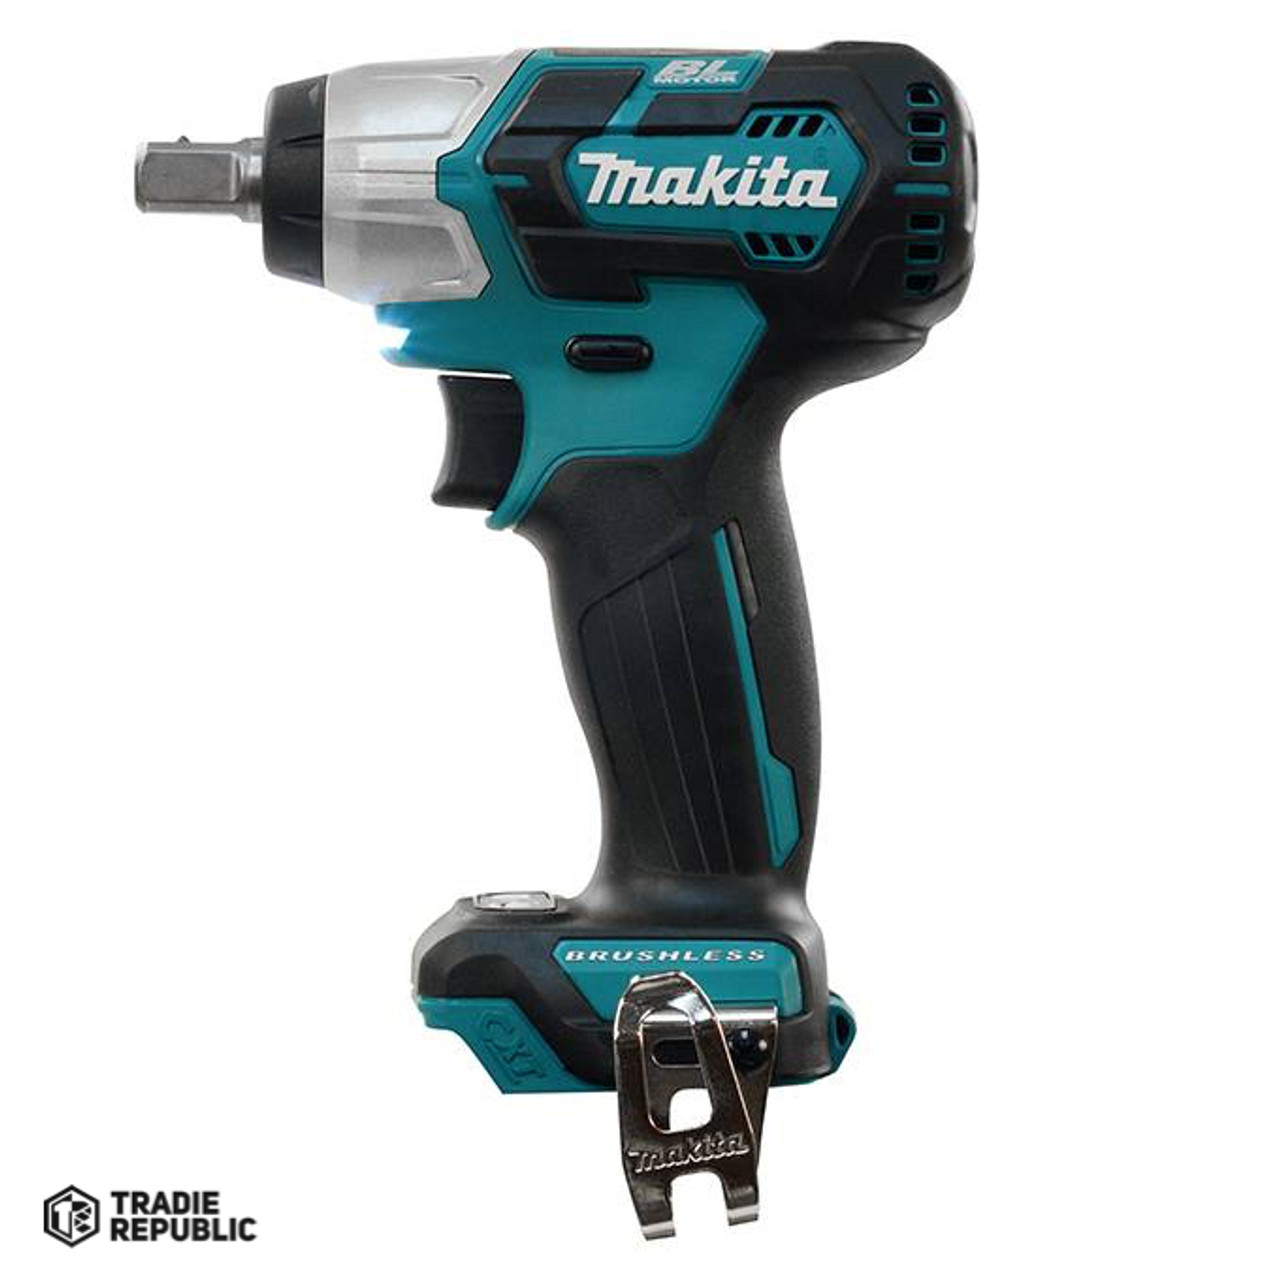 TW161DZ Makita 12V max CXT Brushless 1/2 Sq. Drive Impact Wrench, Tool Only